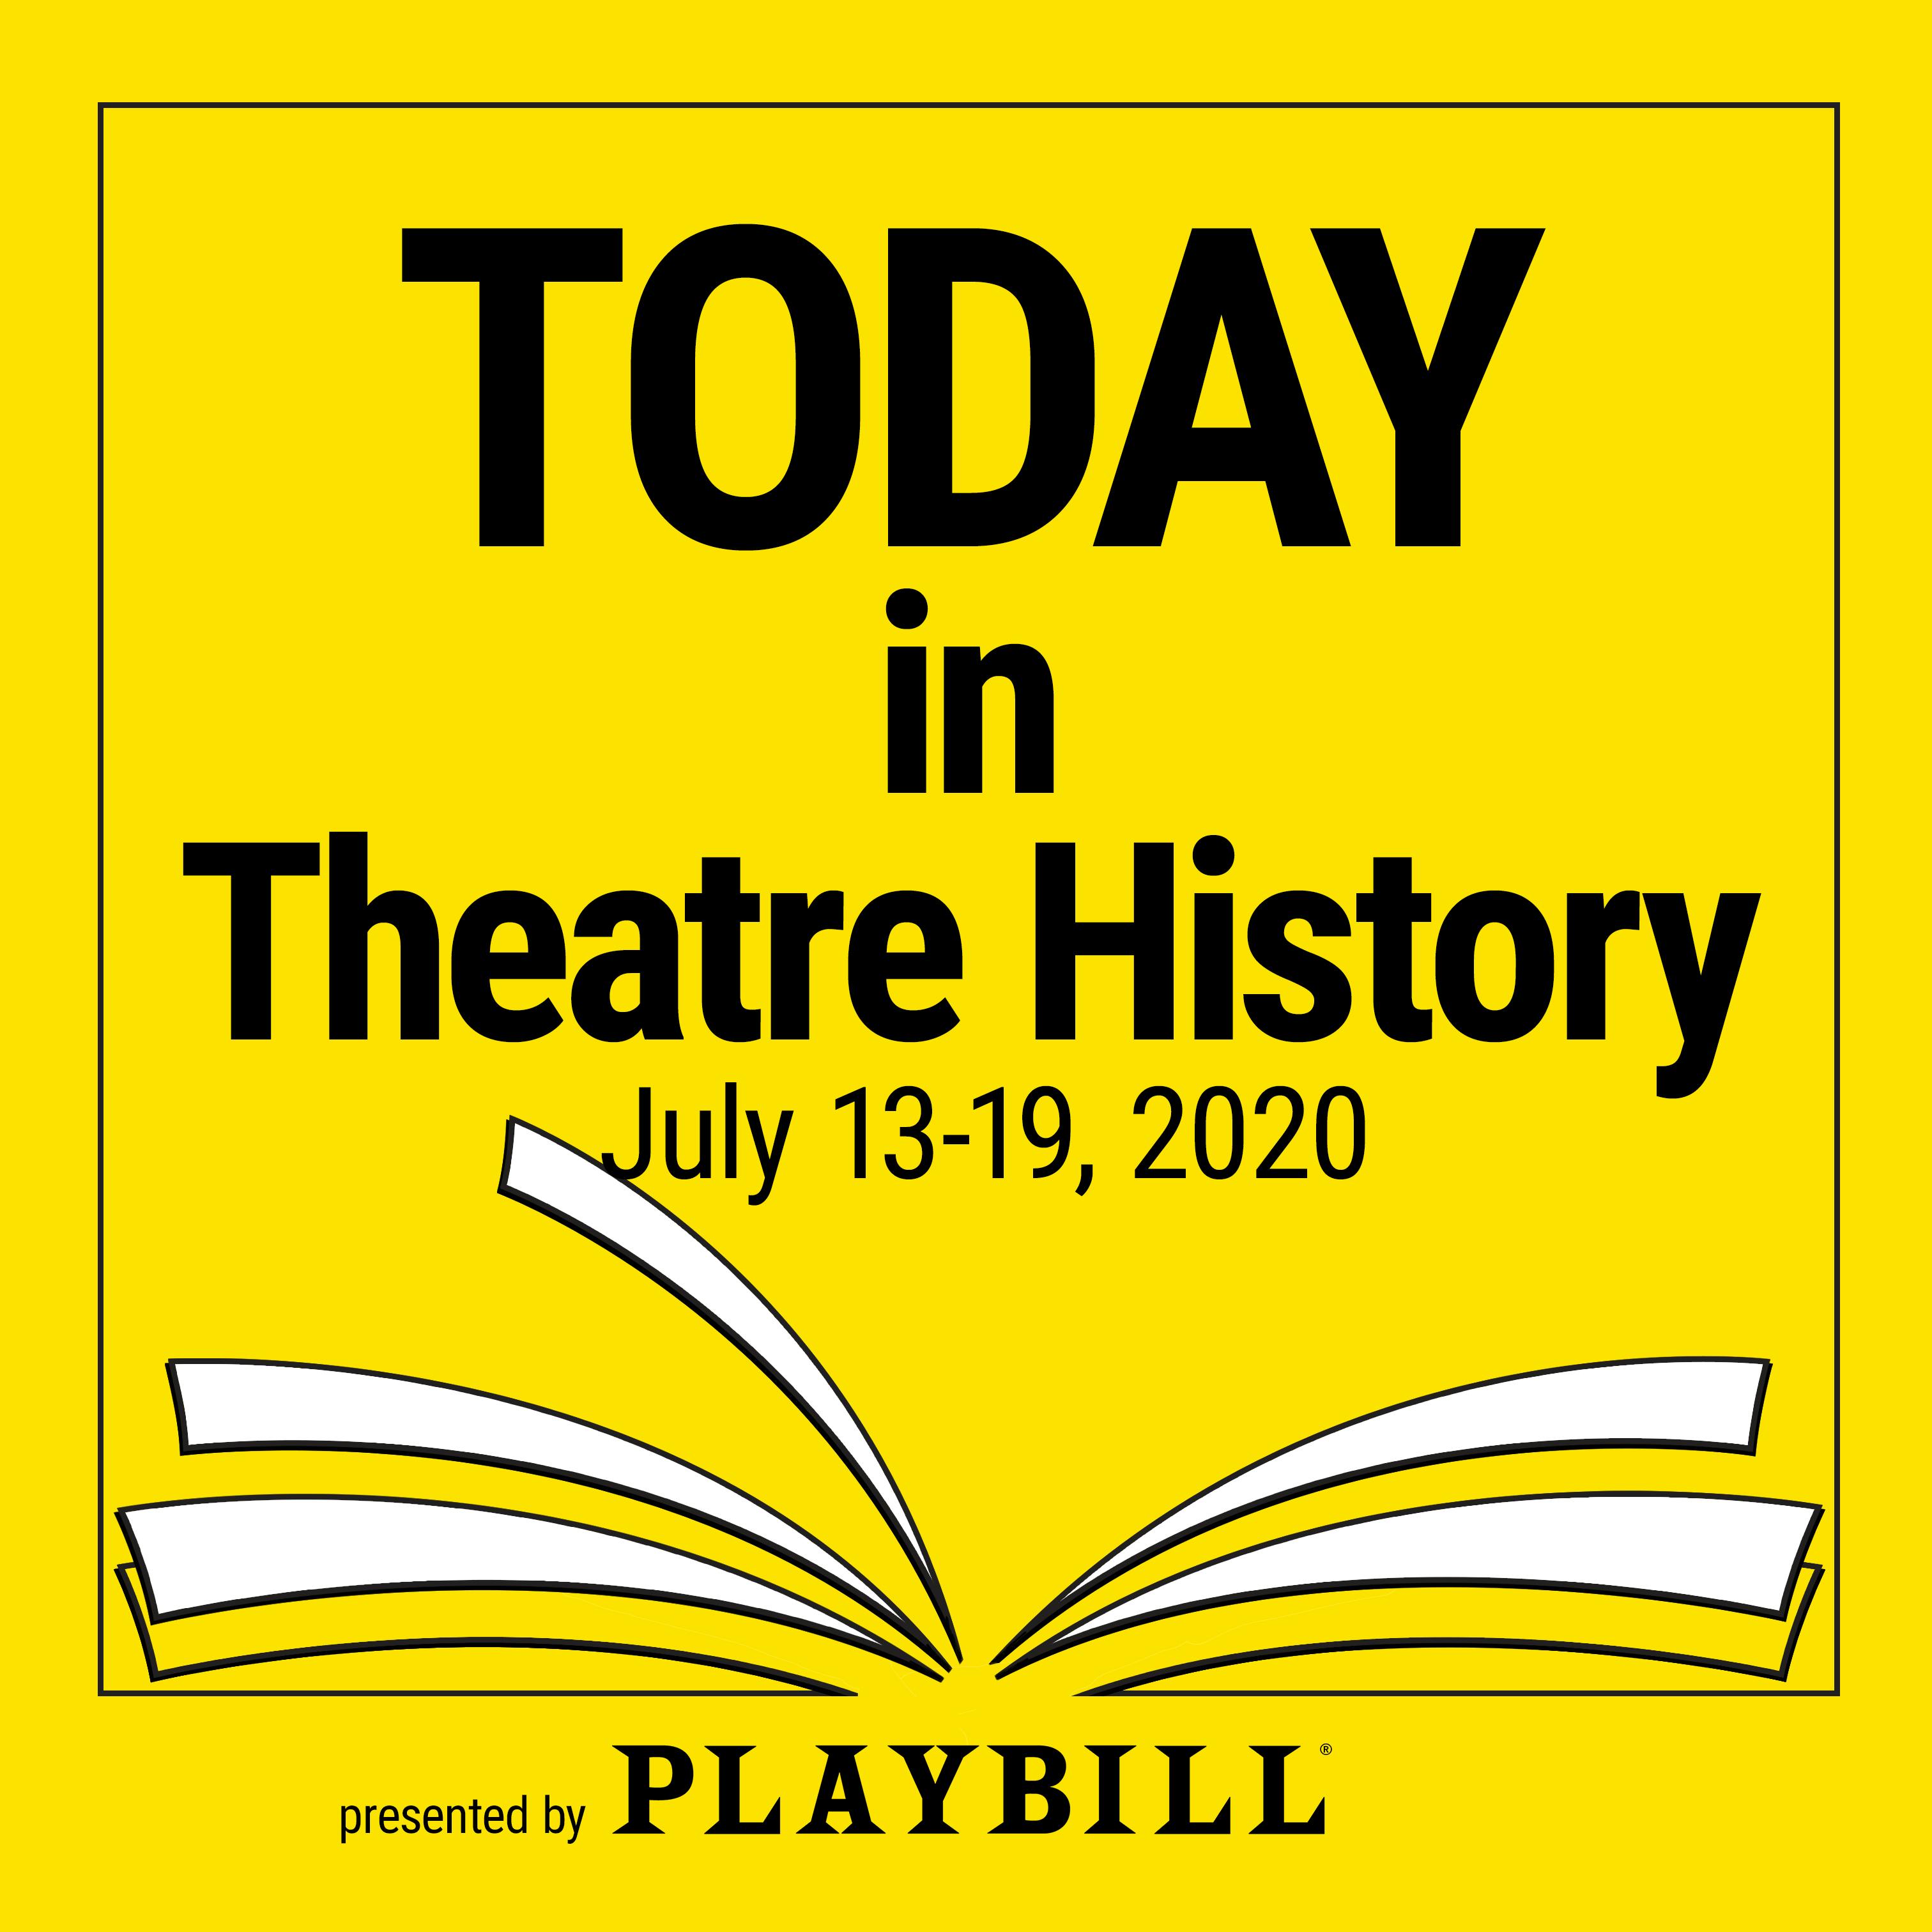 July 13–19, 2020: [Title of Show] premieres on Broadway, and Dogfight makes its Off-Broadway debut this week in theatre history.